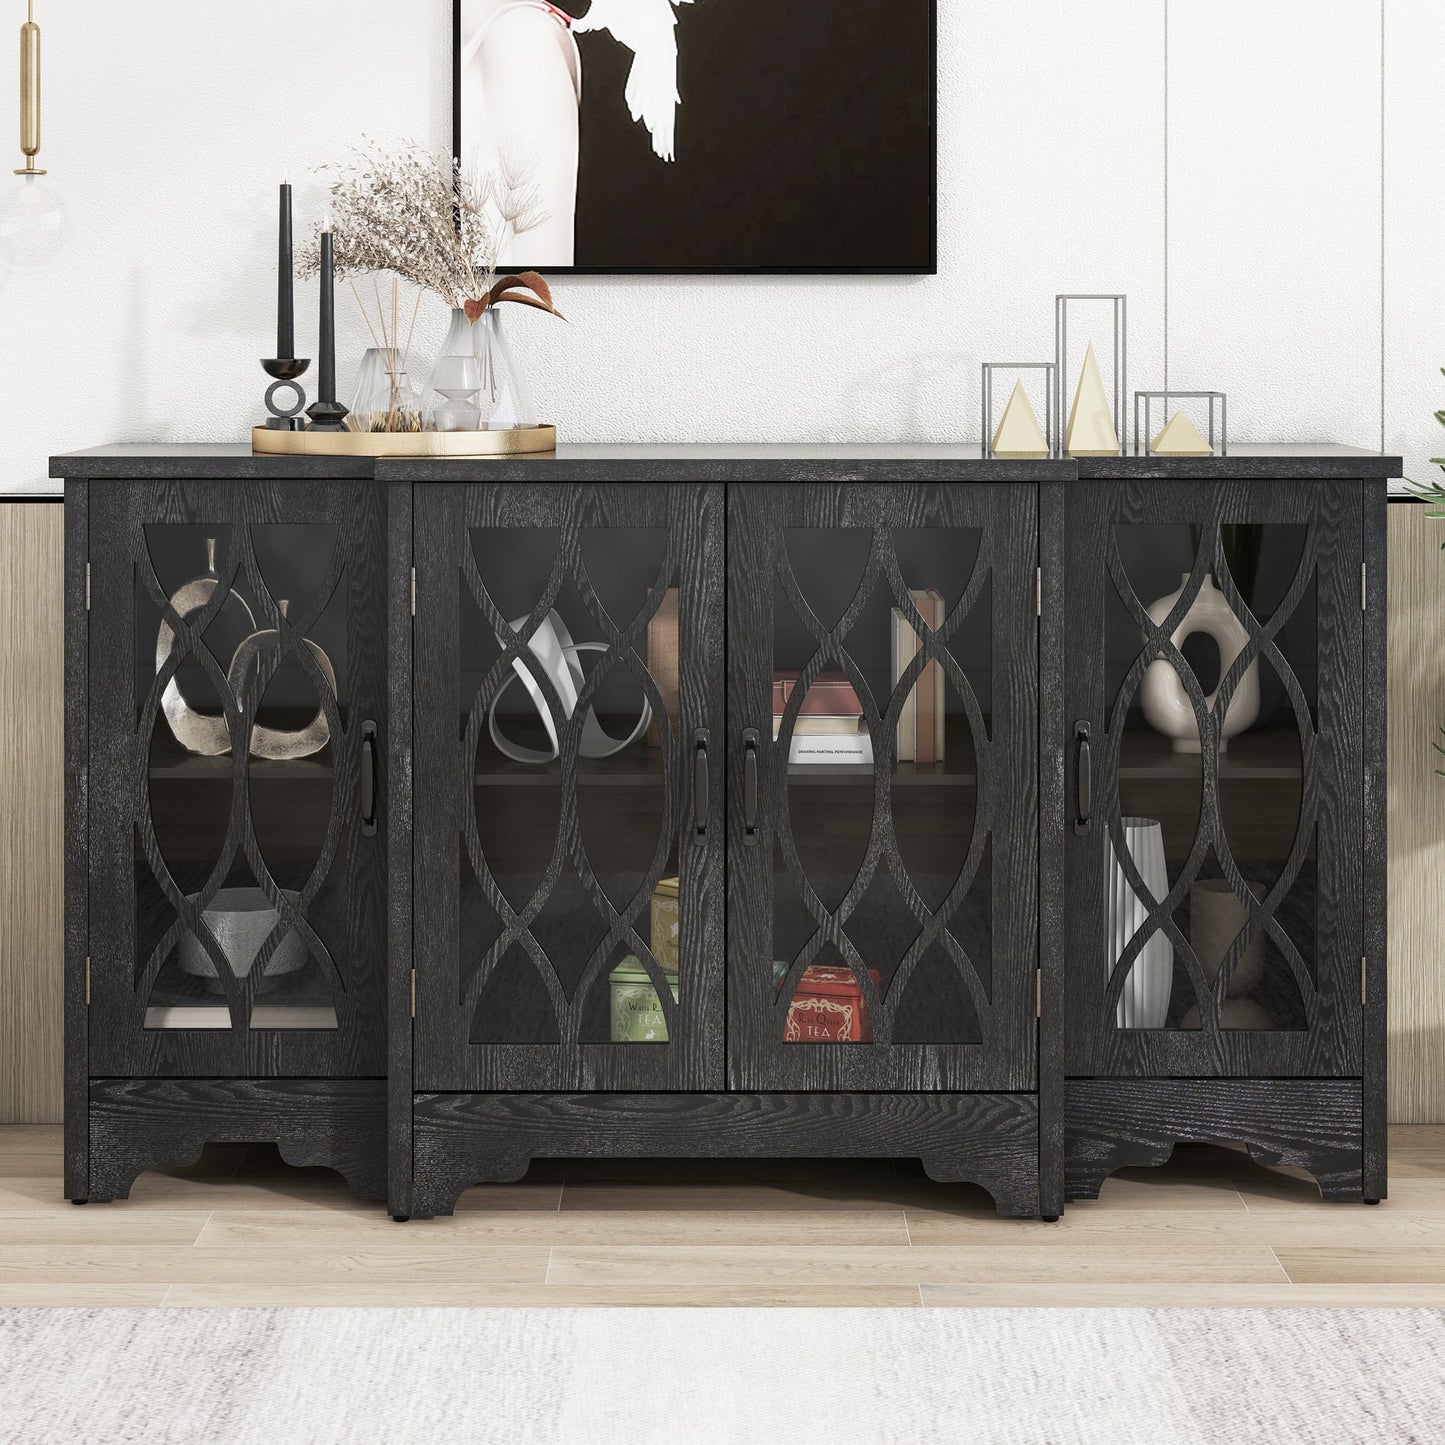 Accent Buffet Sideboard, Atumon Buffet Cabinet with 4 Glass Doors, Wood Buffet Sideboard, Modern Storage Cabinet Furniture for Kitchen Dining Room Living Room, 58"L x 13.4"W x 32"H, Natural